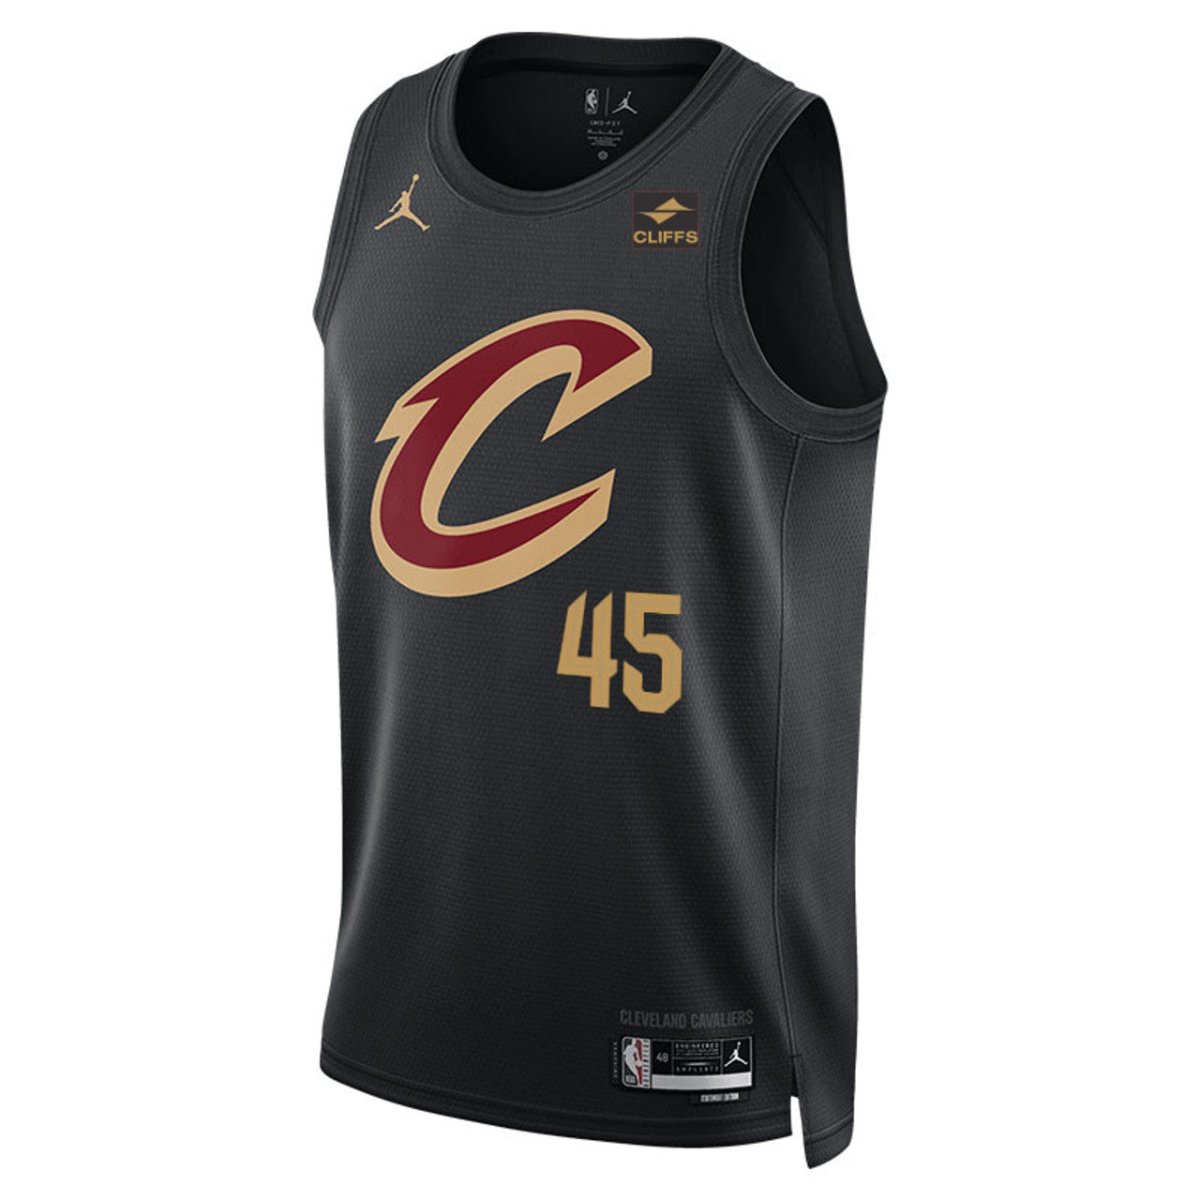 Cleveland Cavaliers update logos to reflect hues in history